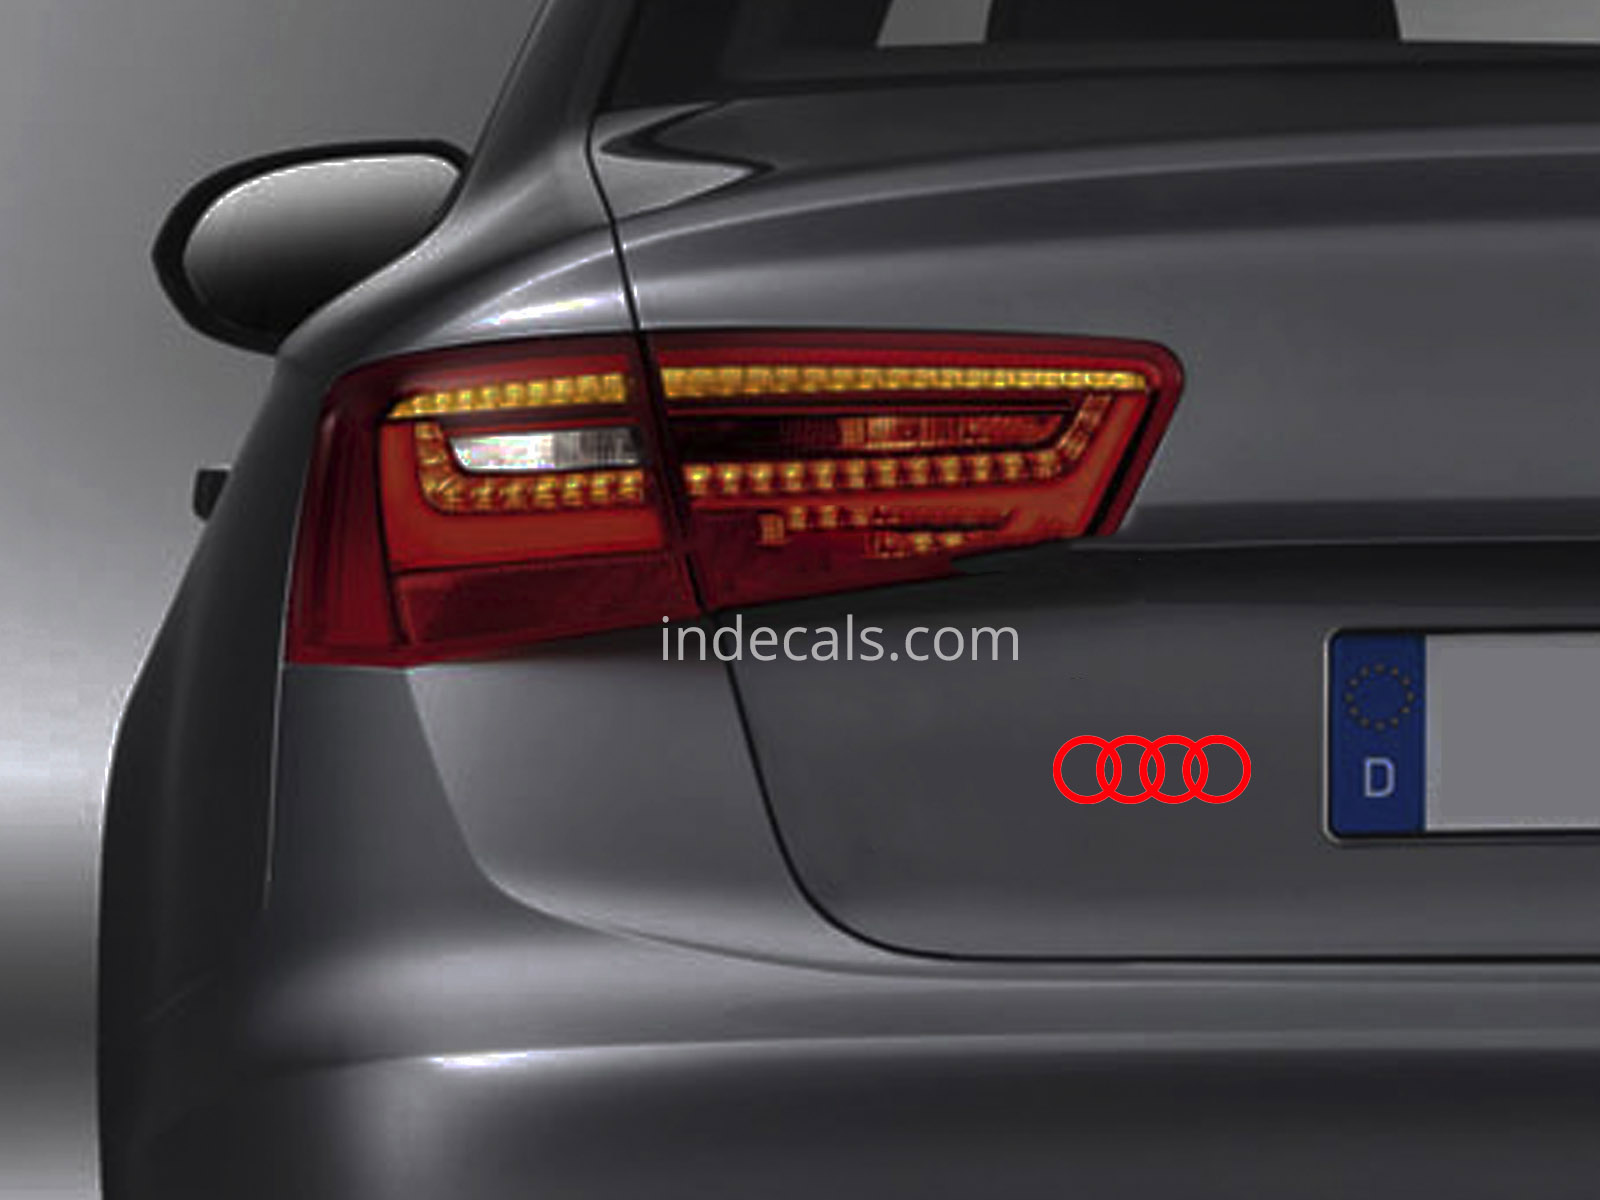 3 x Audi Rings Stickers for Trunk - Red